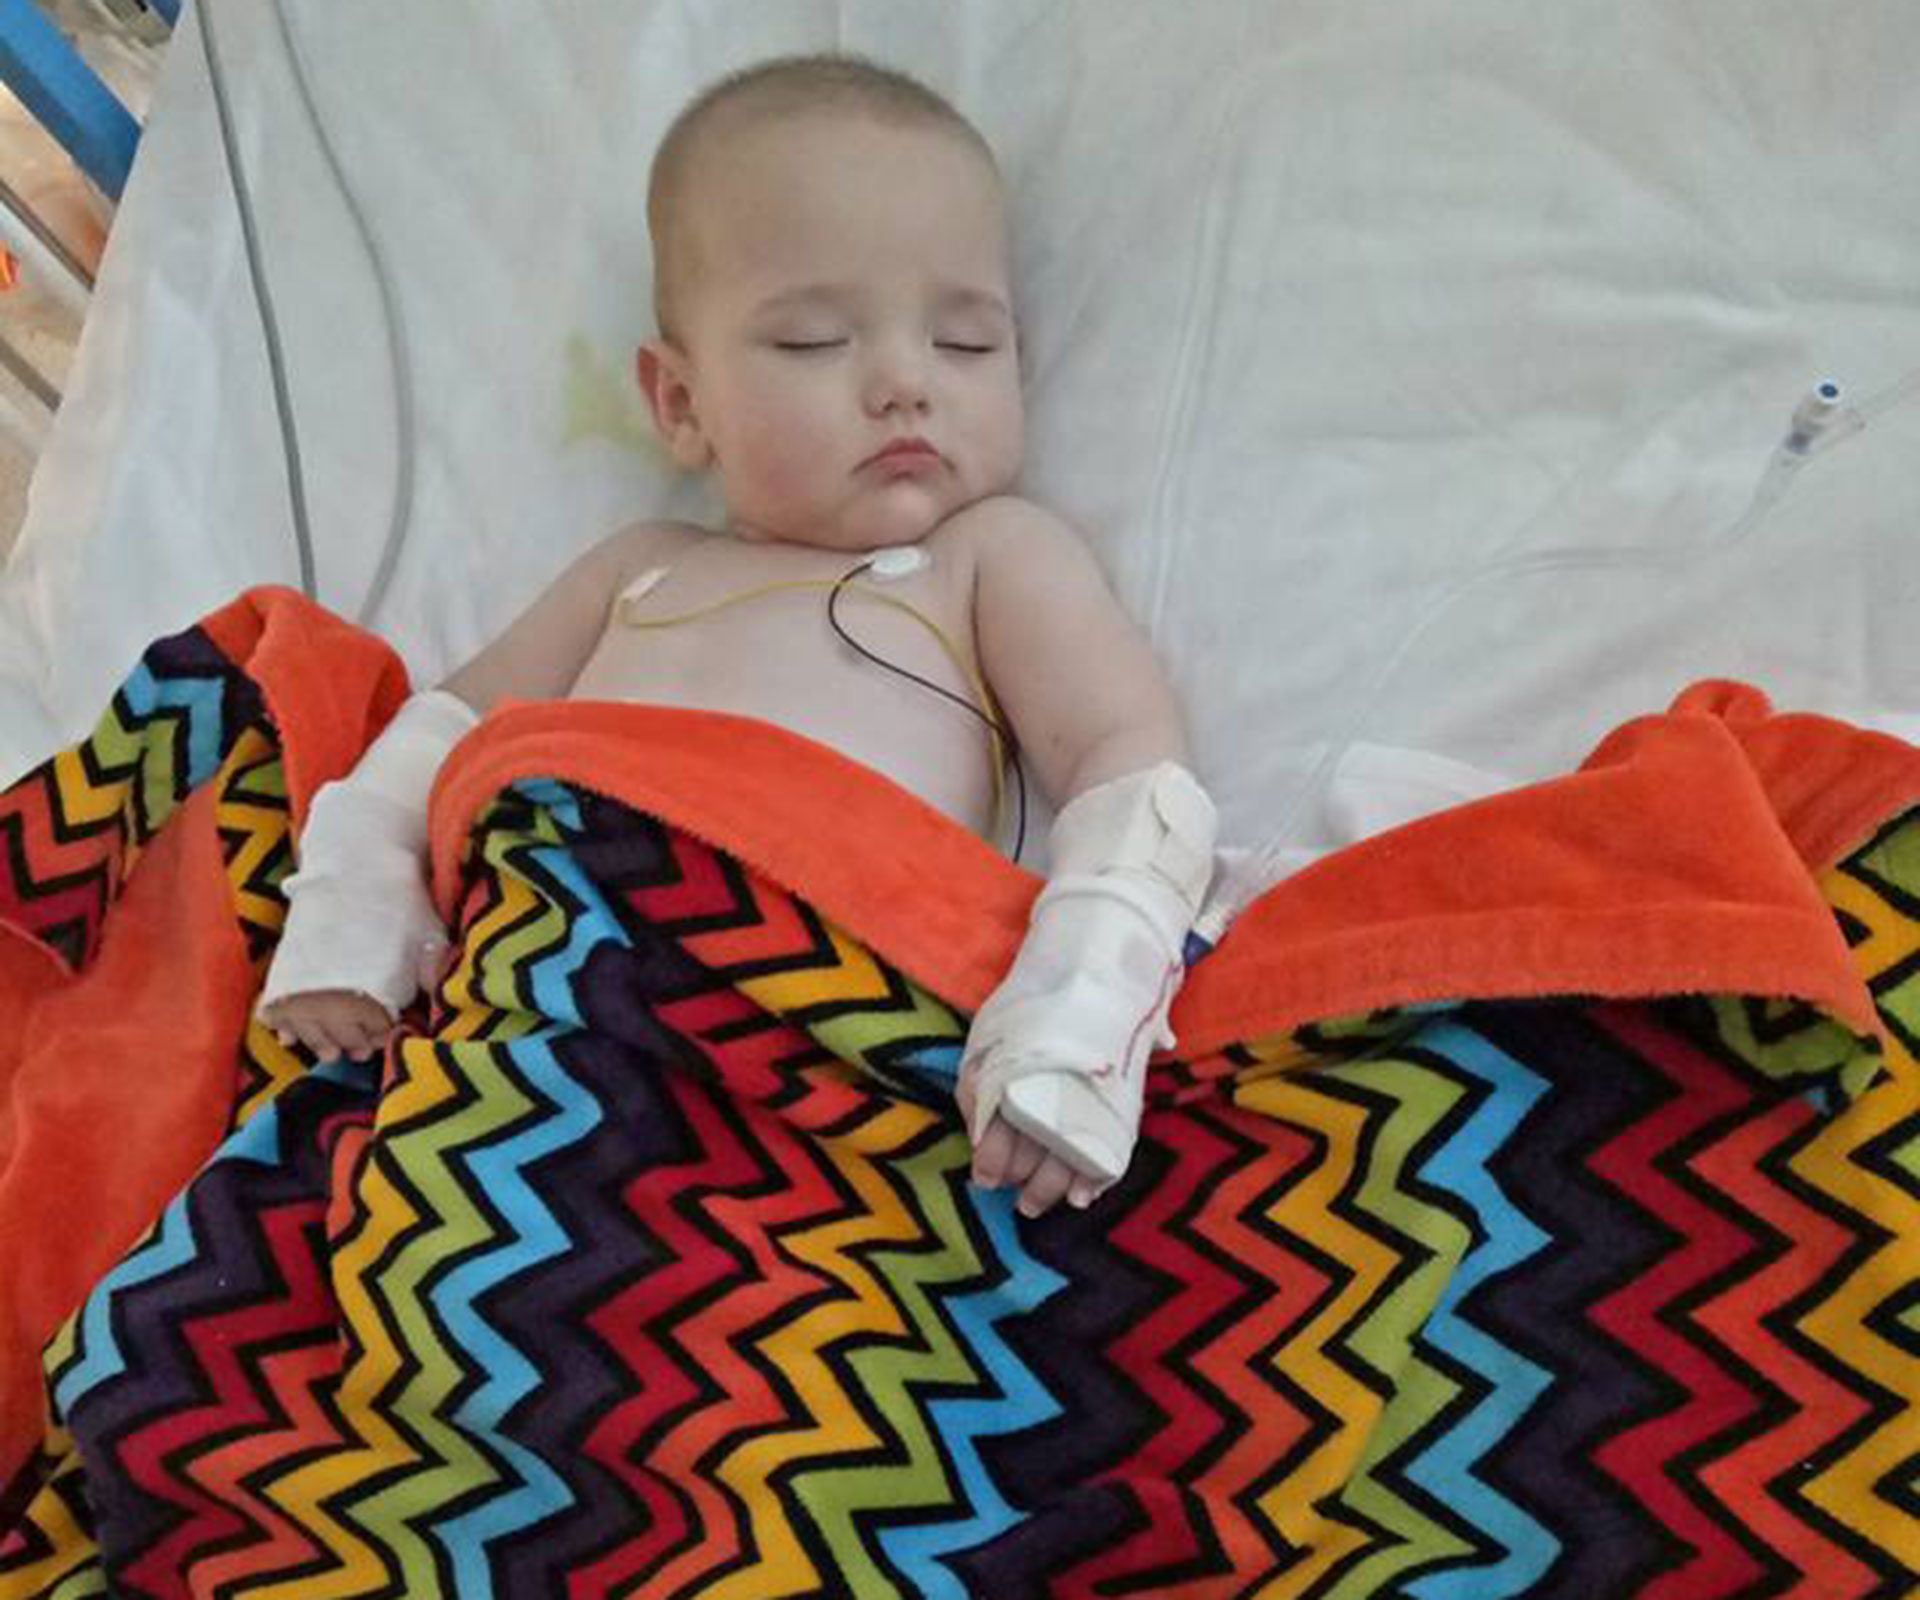 Baby contracts life-threatening virus from shopping trolley, says mum